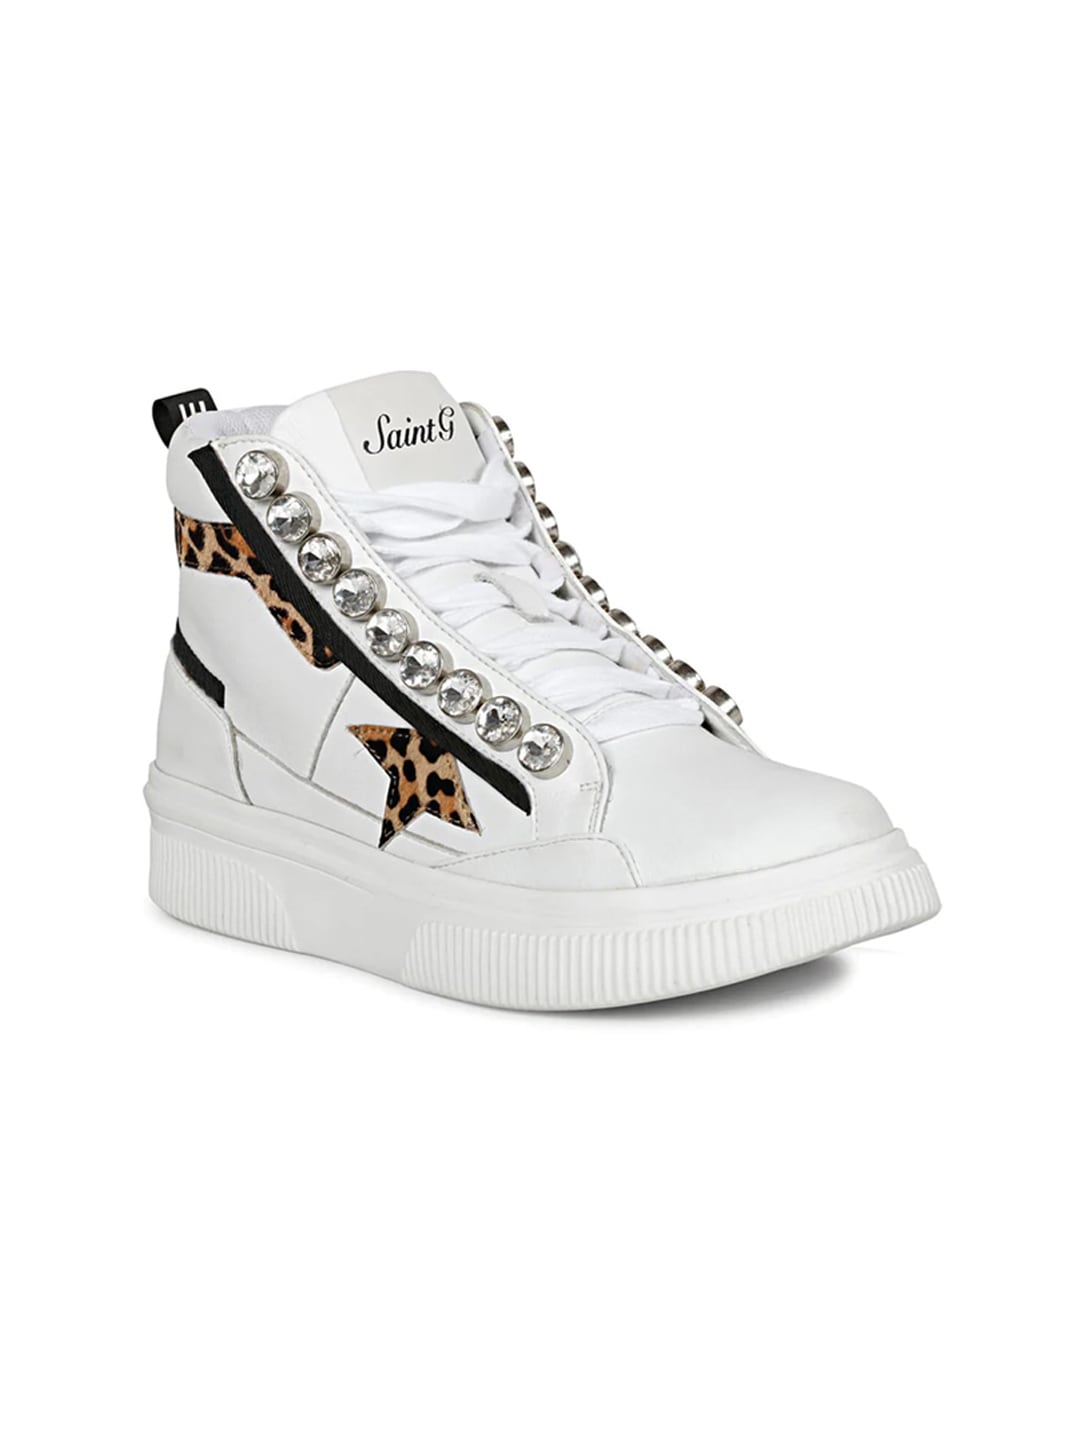 Saint G Women Embellished Leather Mid-Top Sneakers Price in India